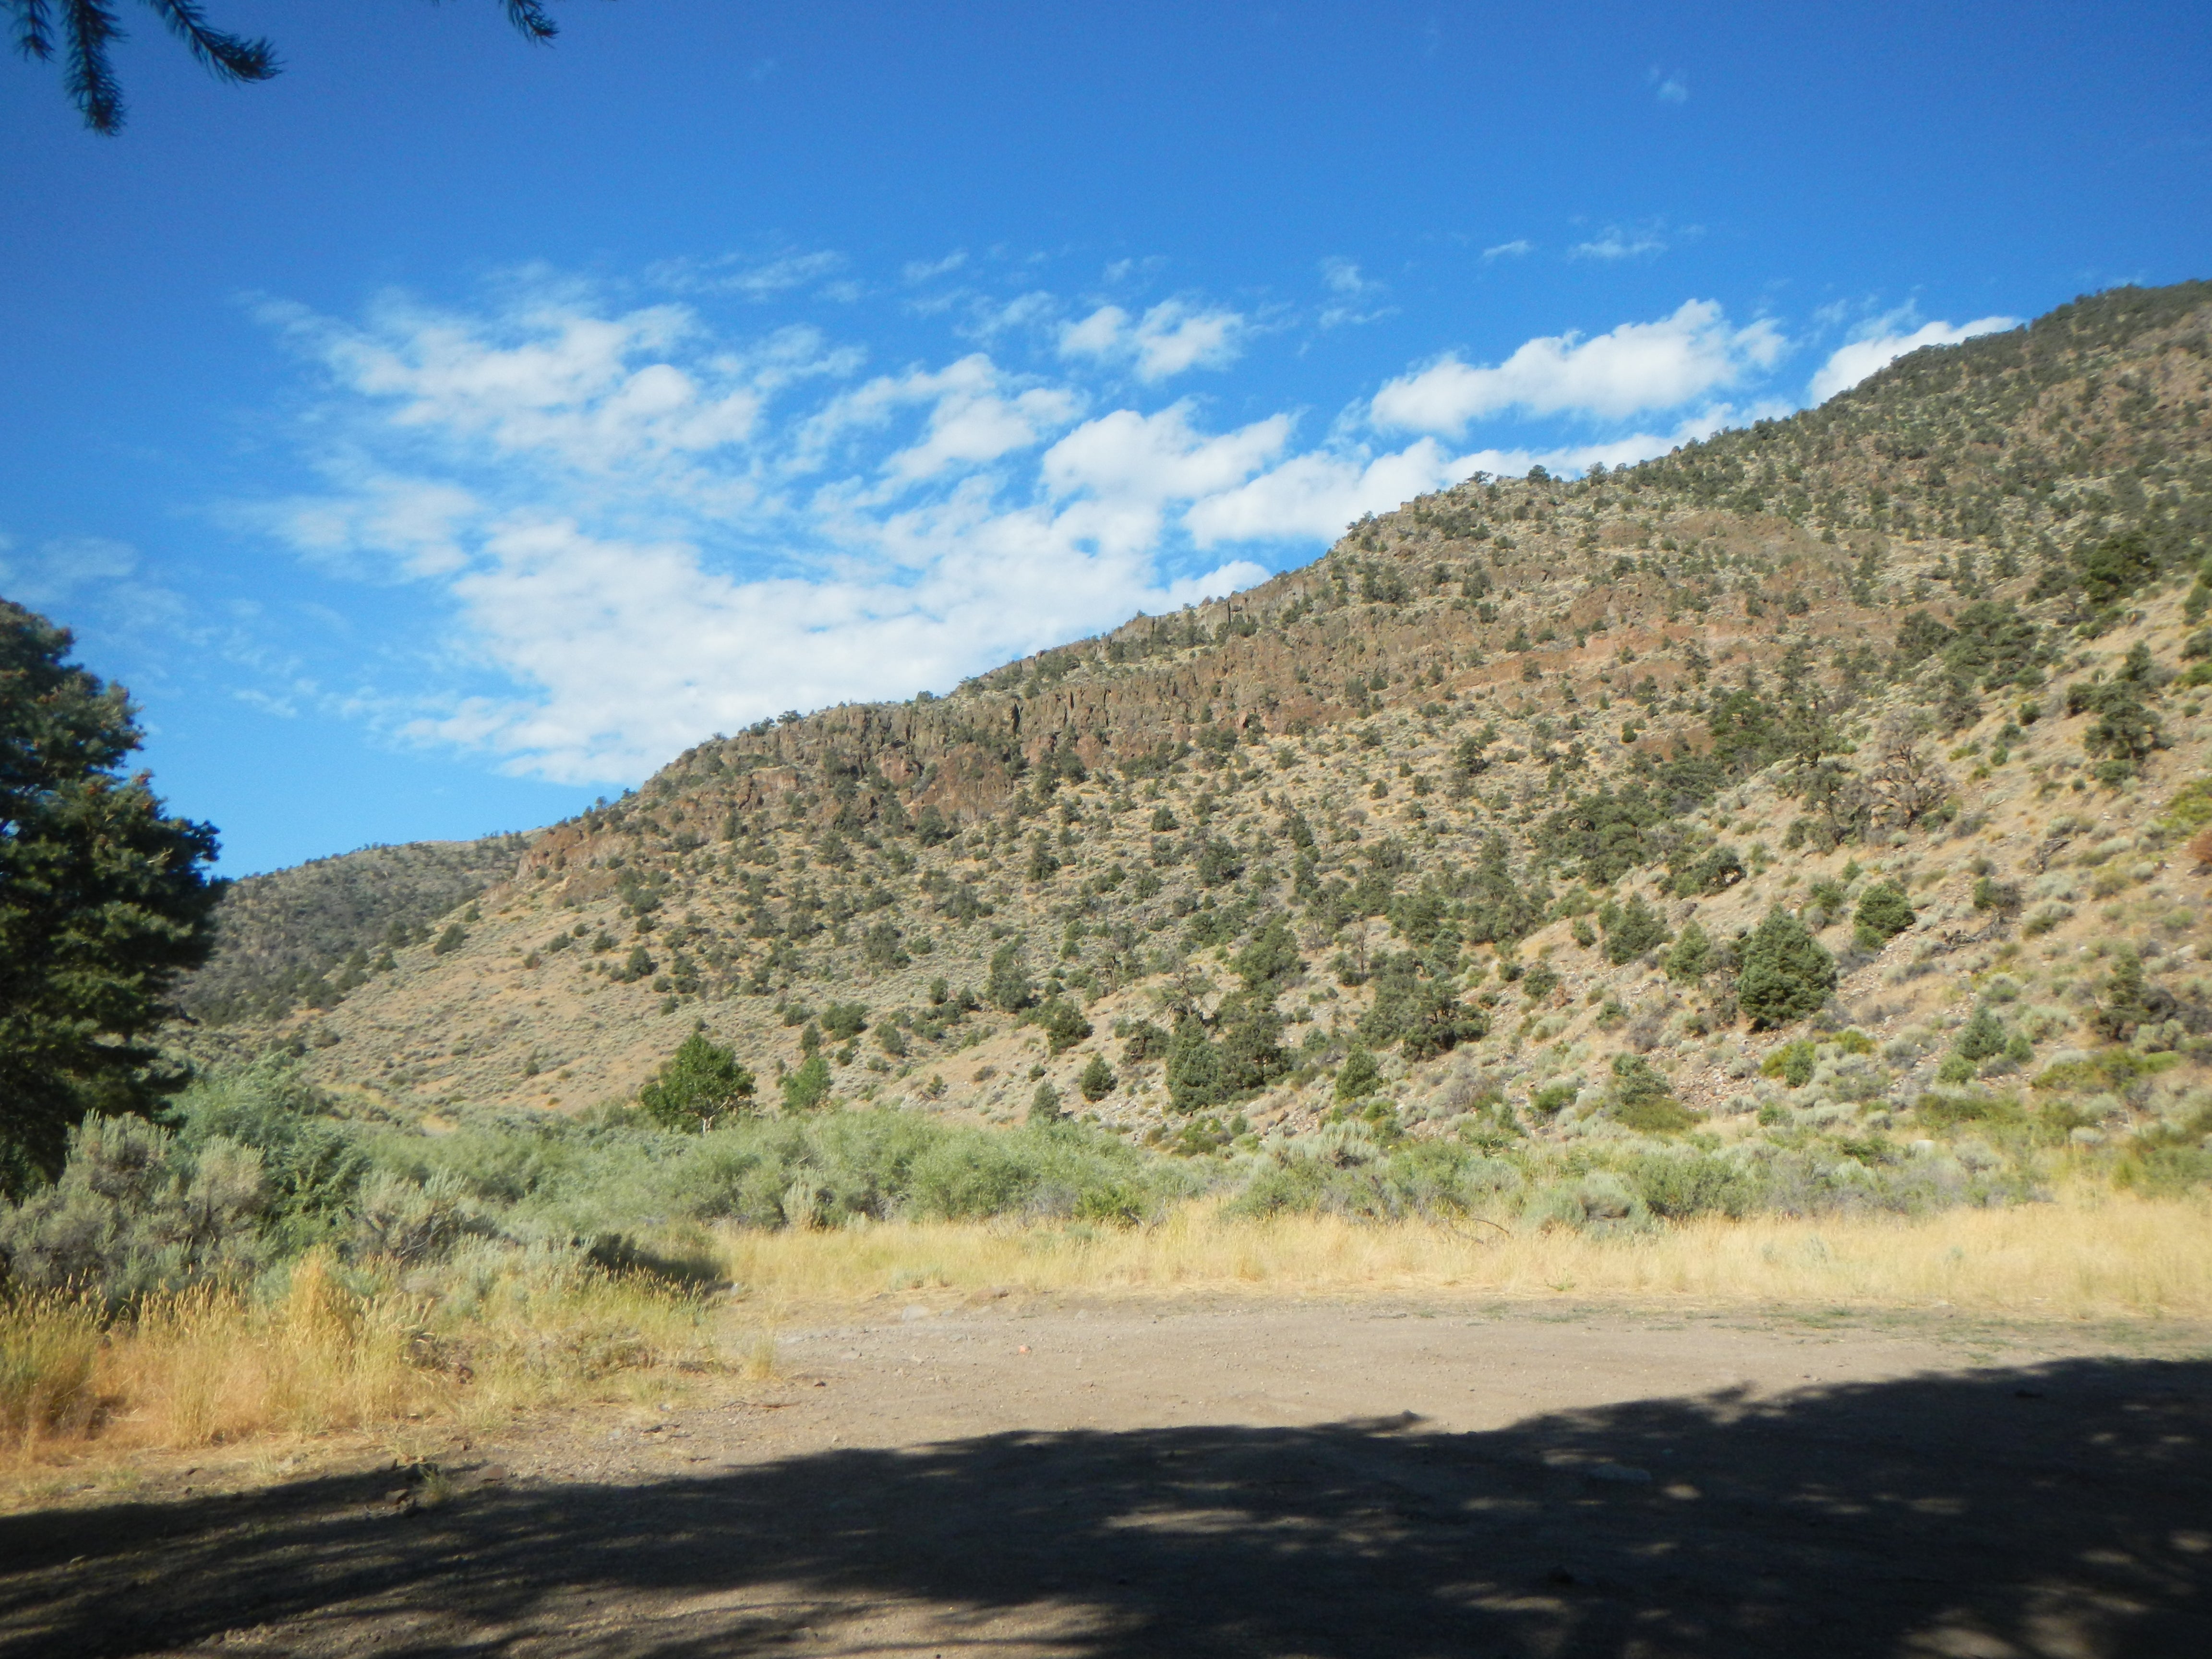 Camper submitted image from Desert Creek Campground - 3